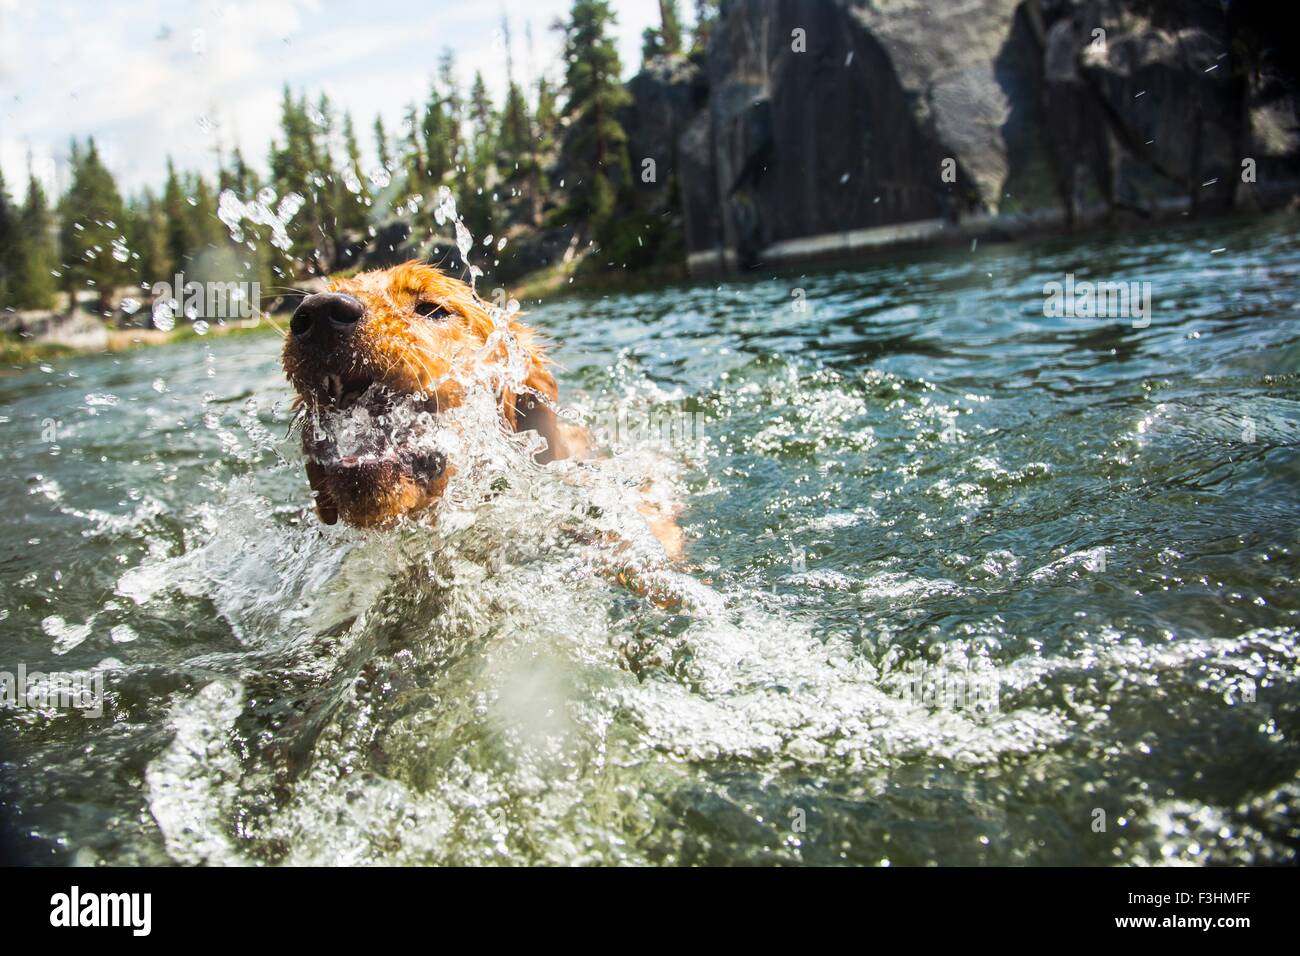 Chien splashing in water, High Sierra National Park, California, USA Banque D'Images